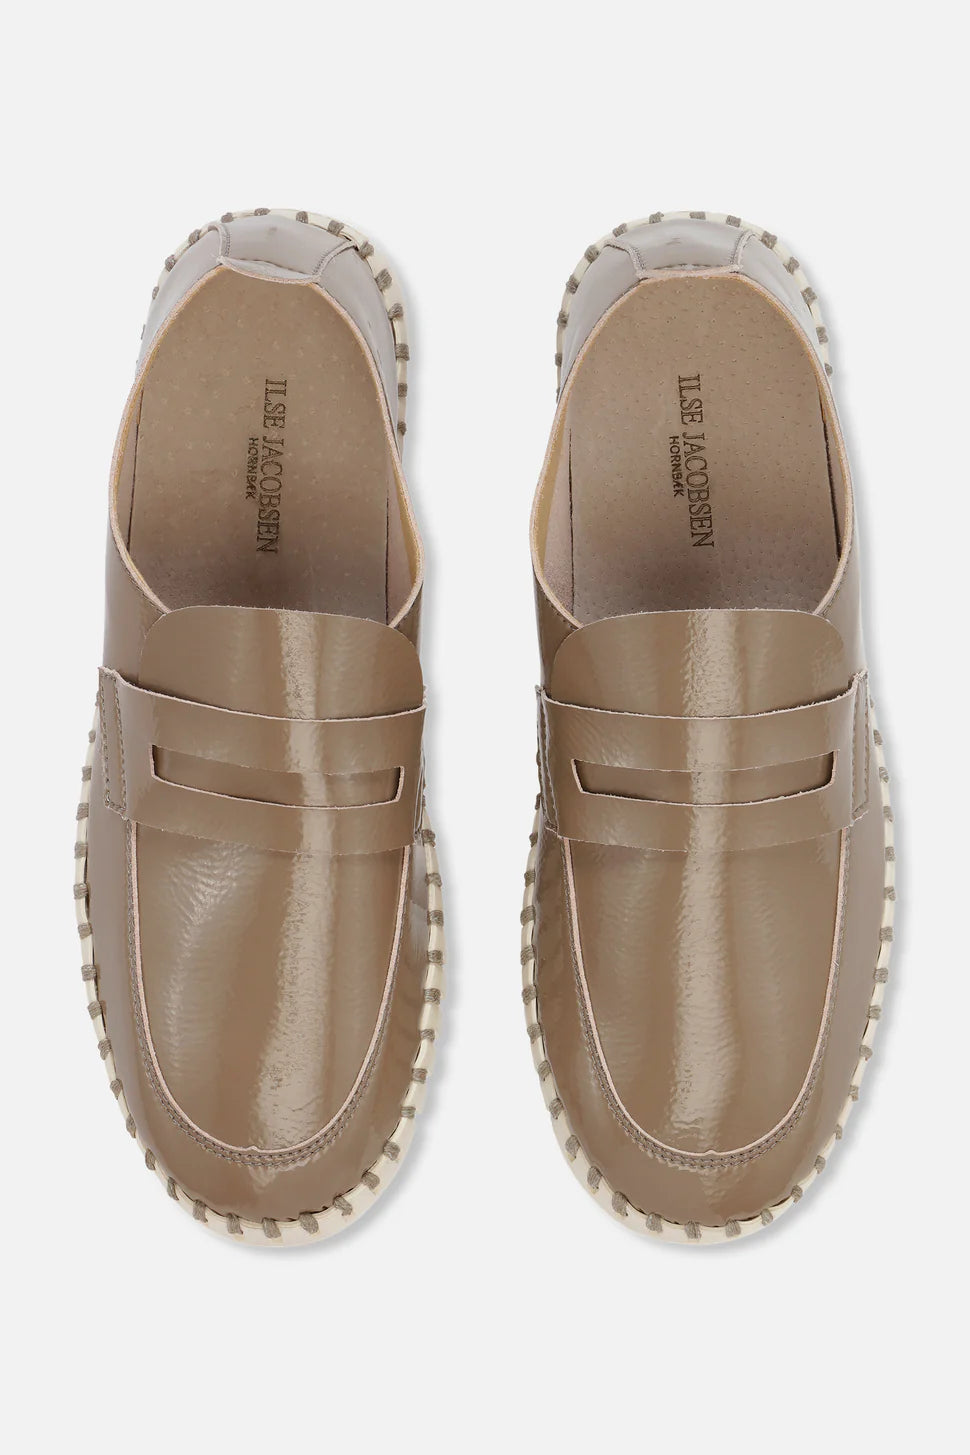 Ilse Jacobsen Tulip 3865 Perforated Slip-On Loafer in Wheat